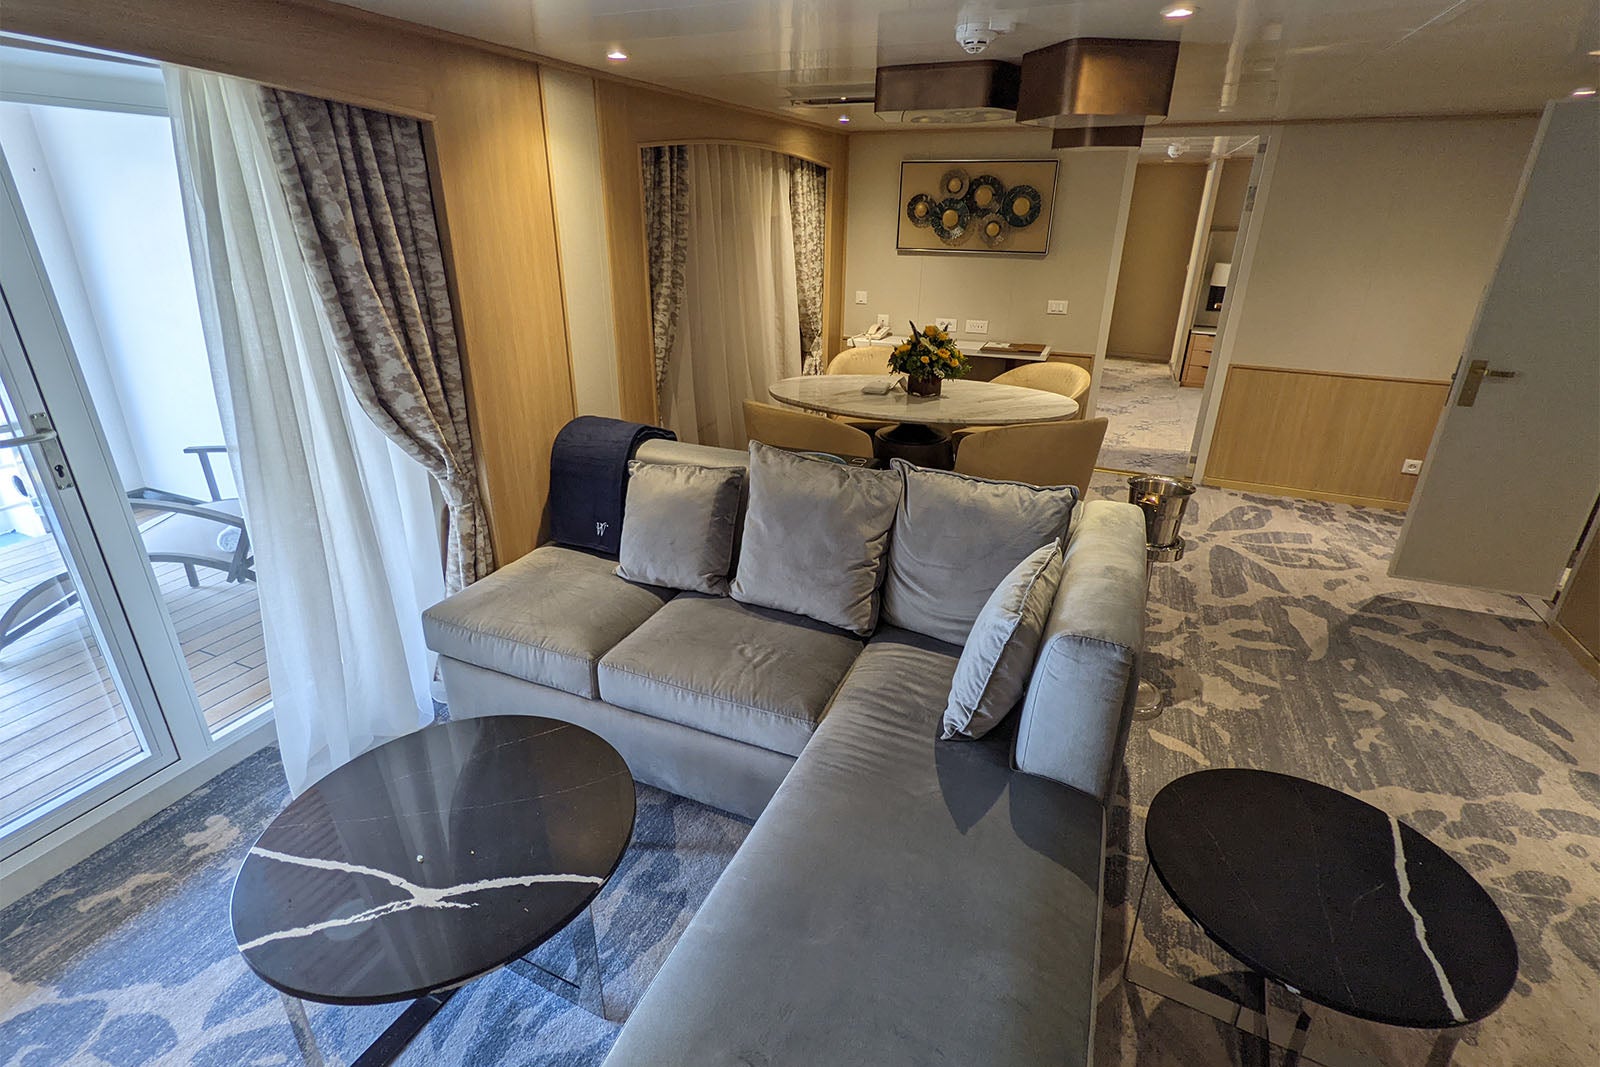 Living room of Owner's Suite on Star Pride cruise ship